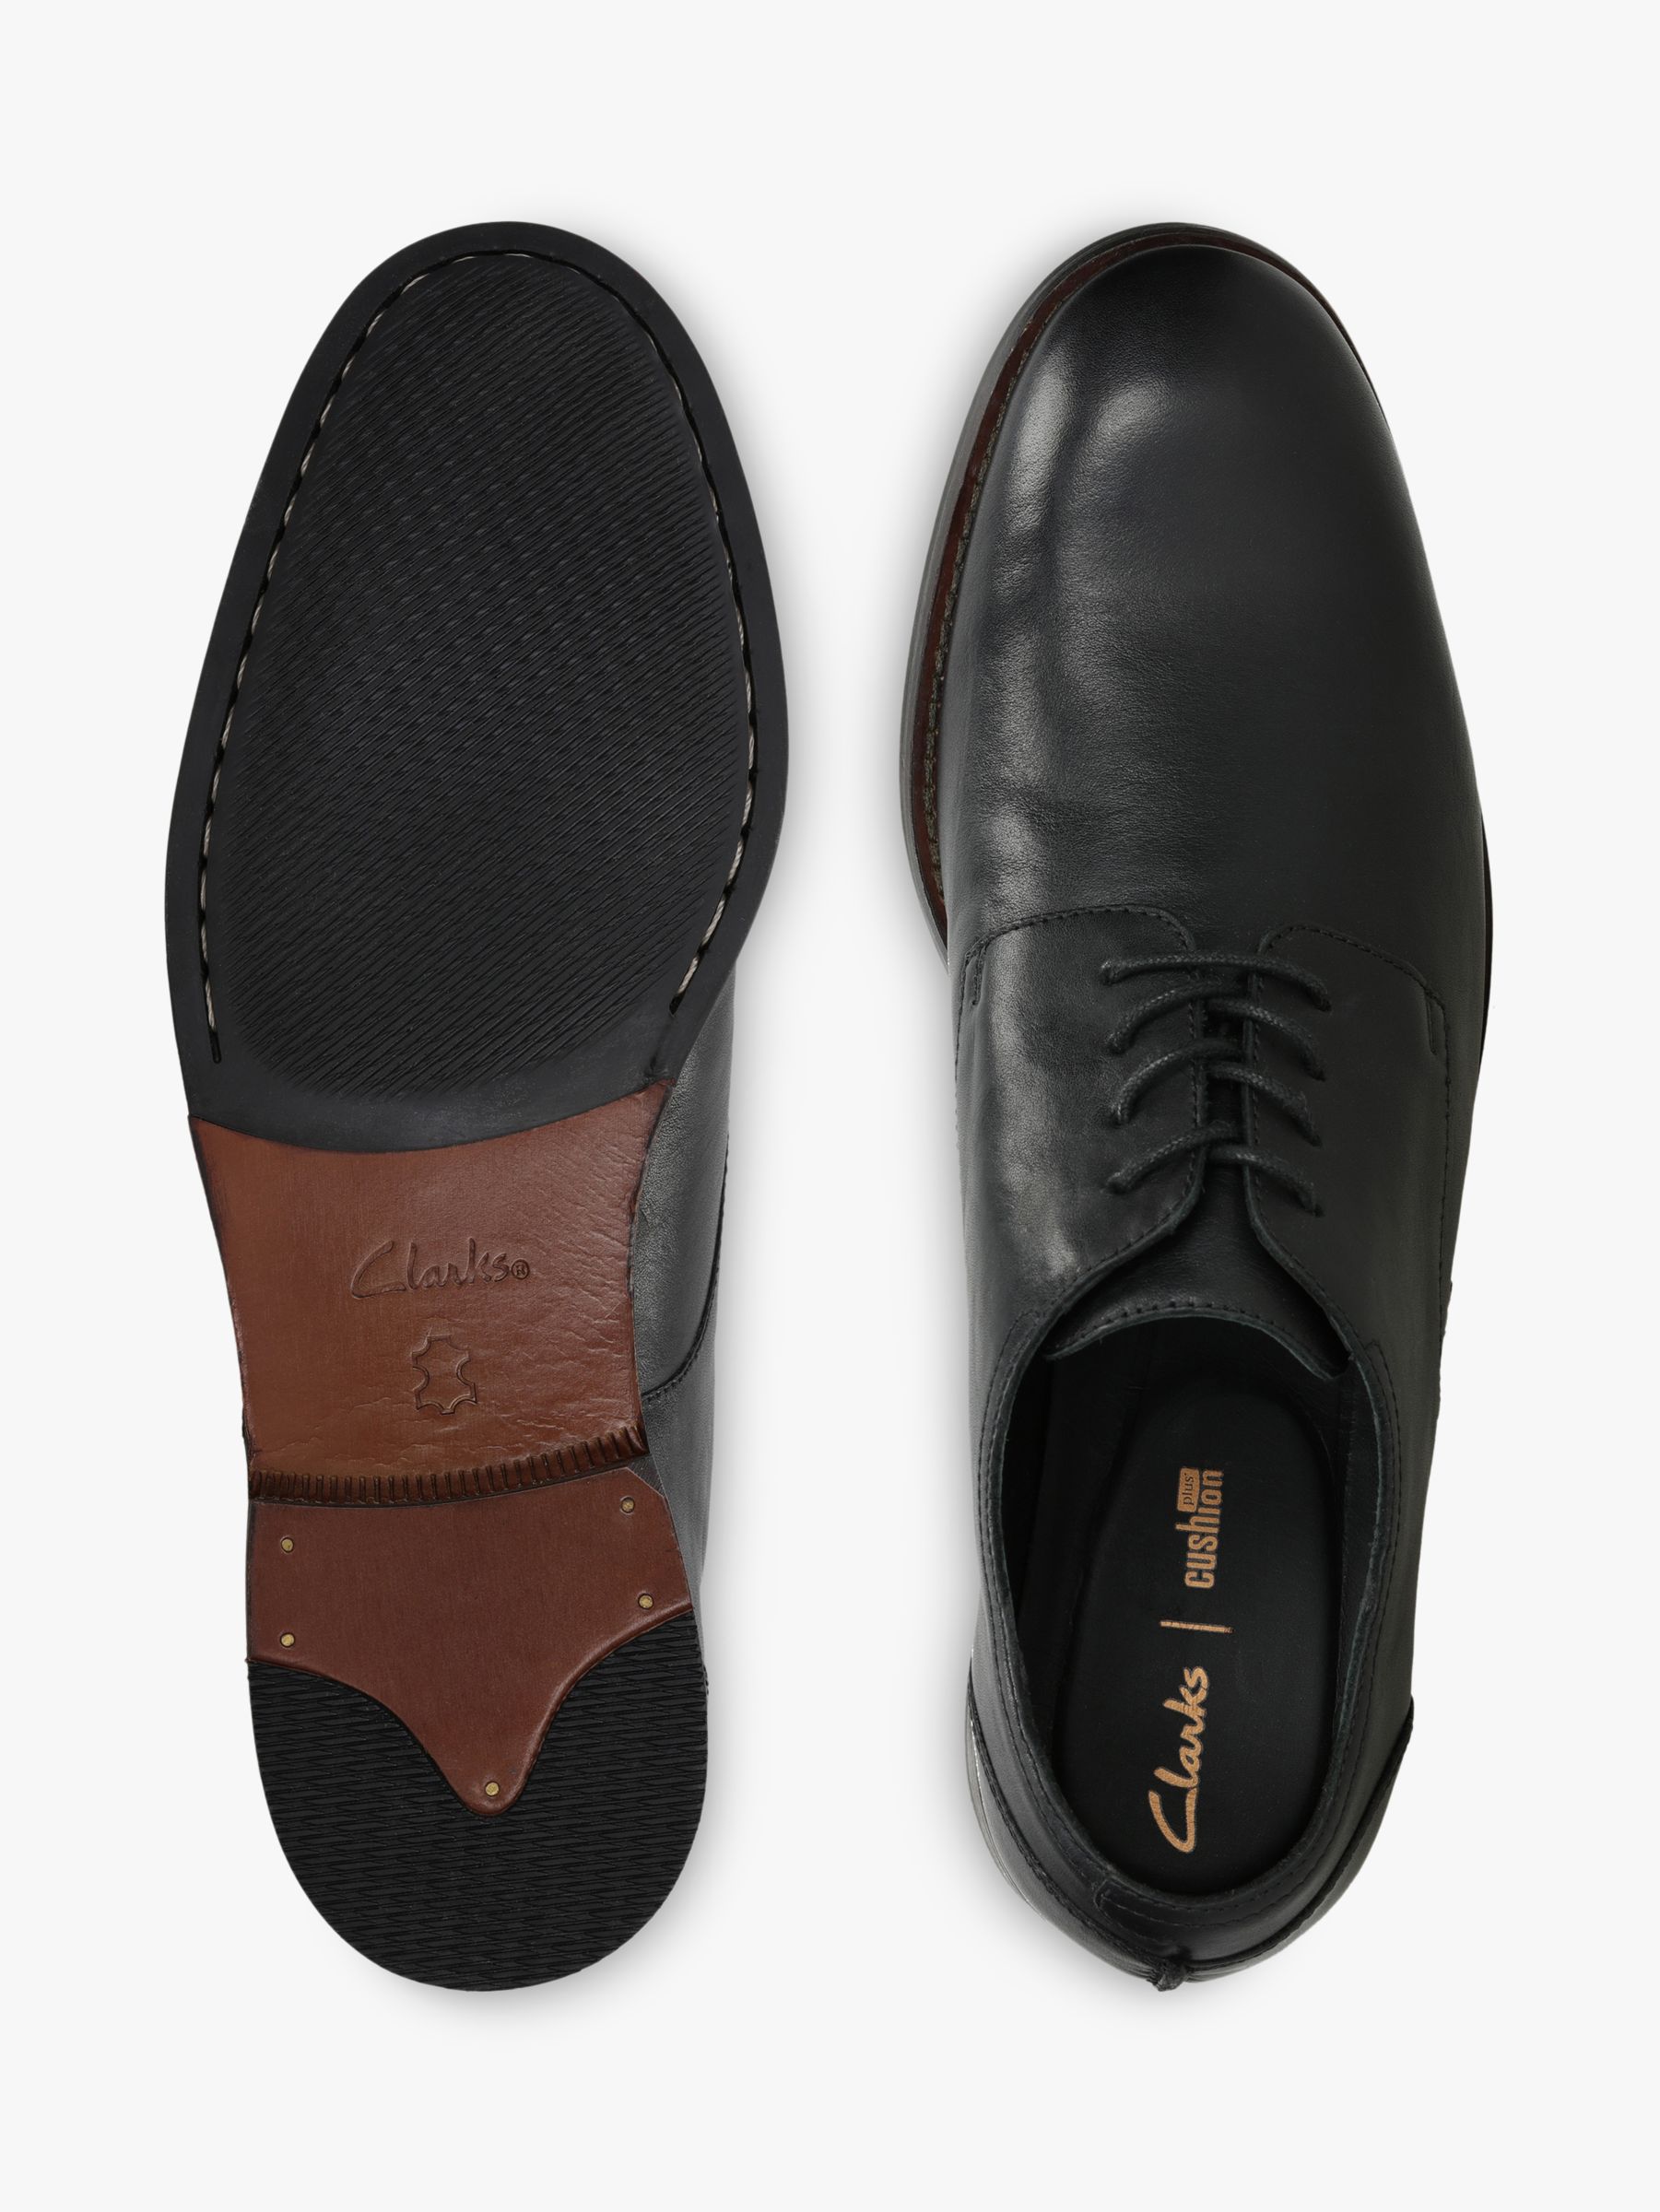 clark office shoes off 79% - online-sms.in